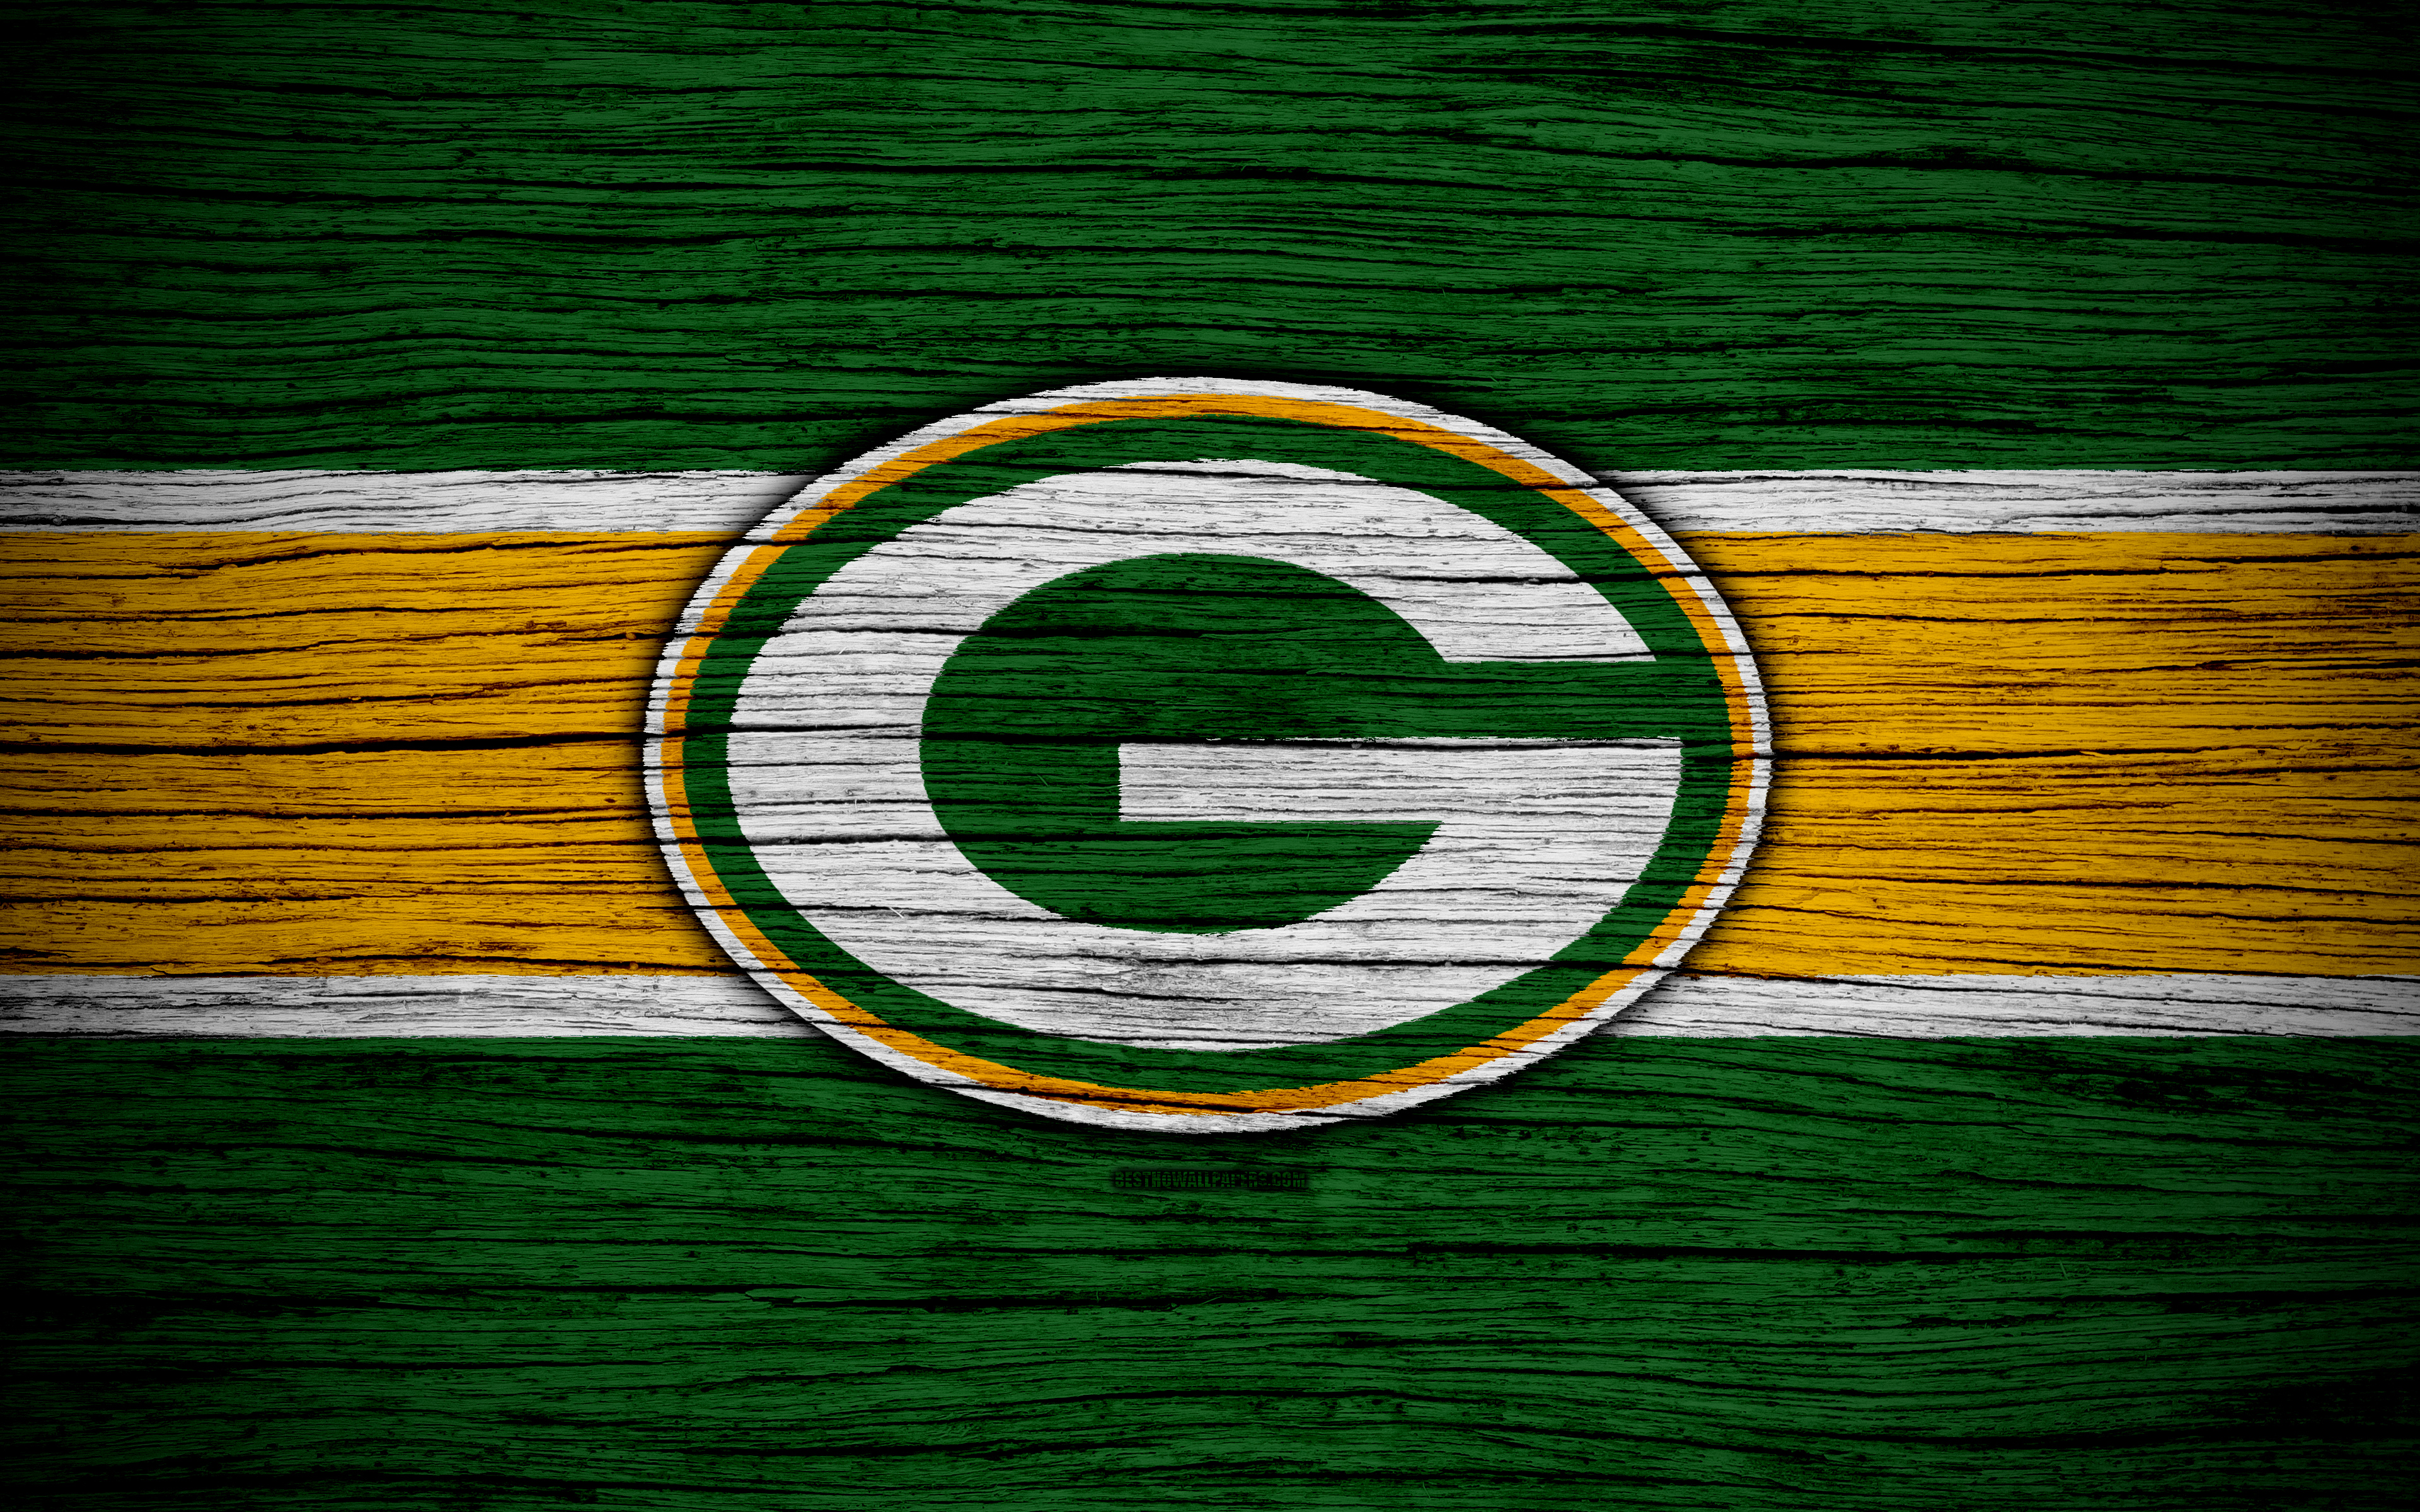 Green Bay Packers Nfl Nfc 4k Wooden Texture American 2111163 Hd Wallpaper Backgrounds Download